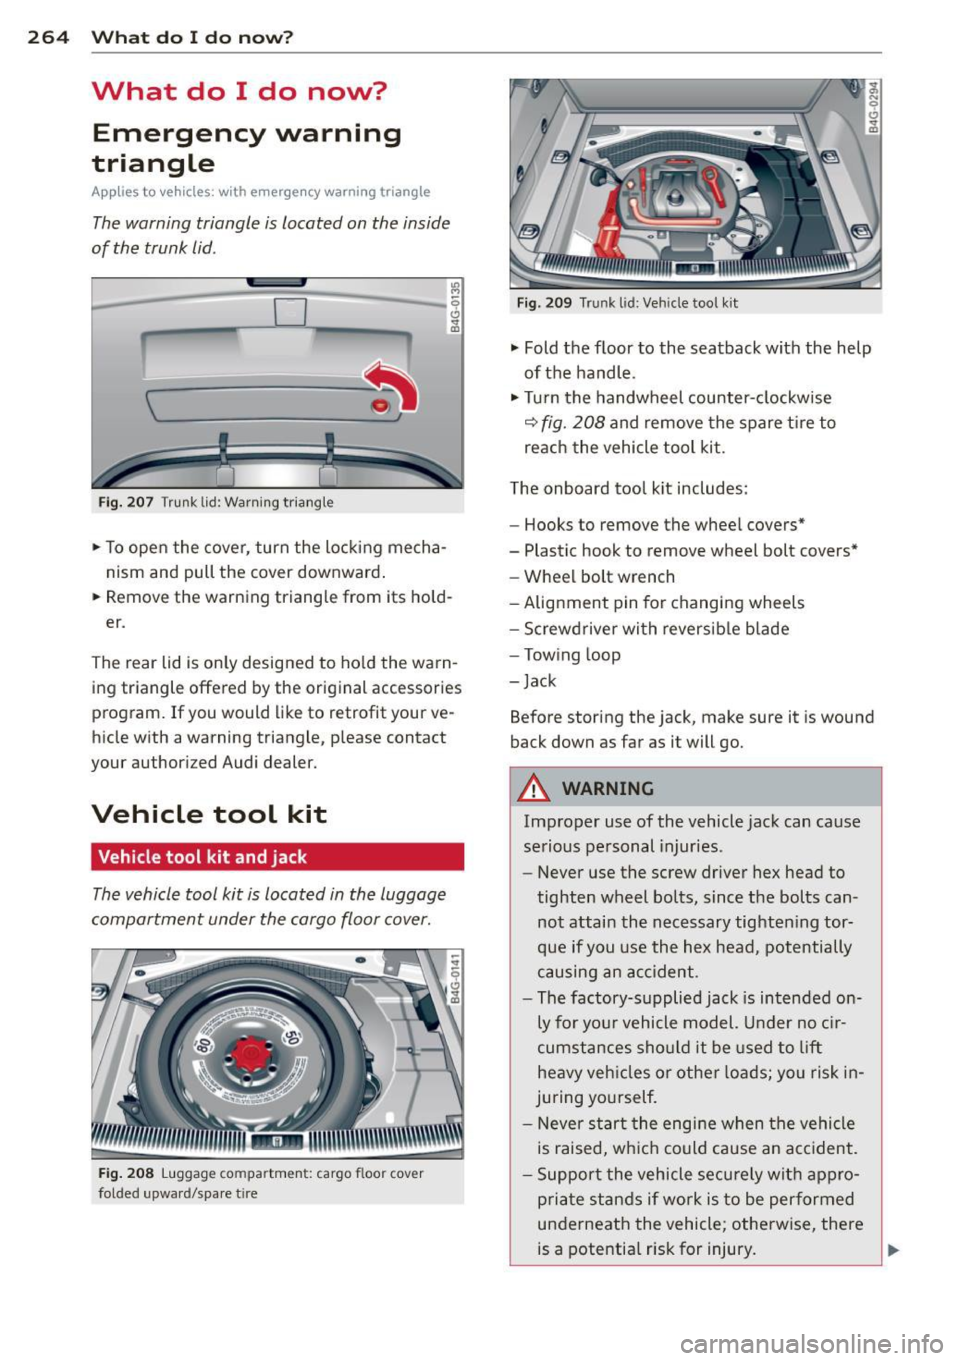 AUDI A7 2014  Owners Manual 264  What  do  I  do  now? 
What  do  I  do  now? 
Emergency  warning 
triangle 
App lies  to  vehicles:  with  emerge ncy warning  triangle 
The warning  triangle  is located  on  the  inside 
of  th